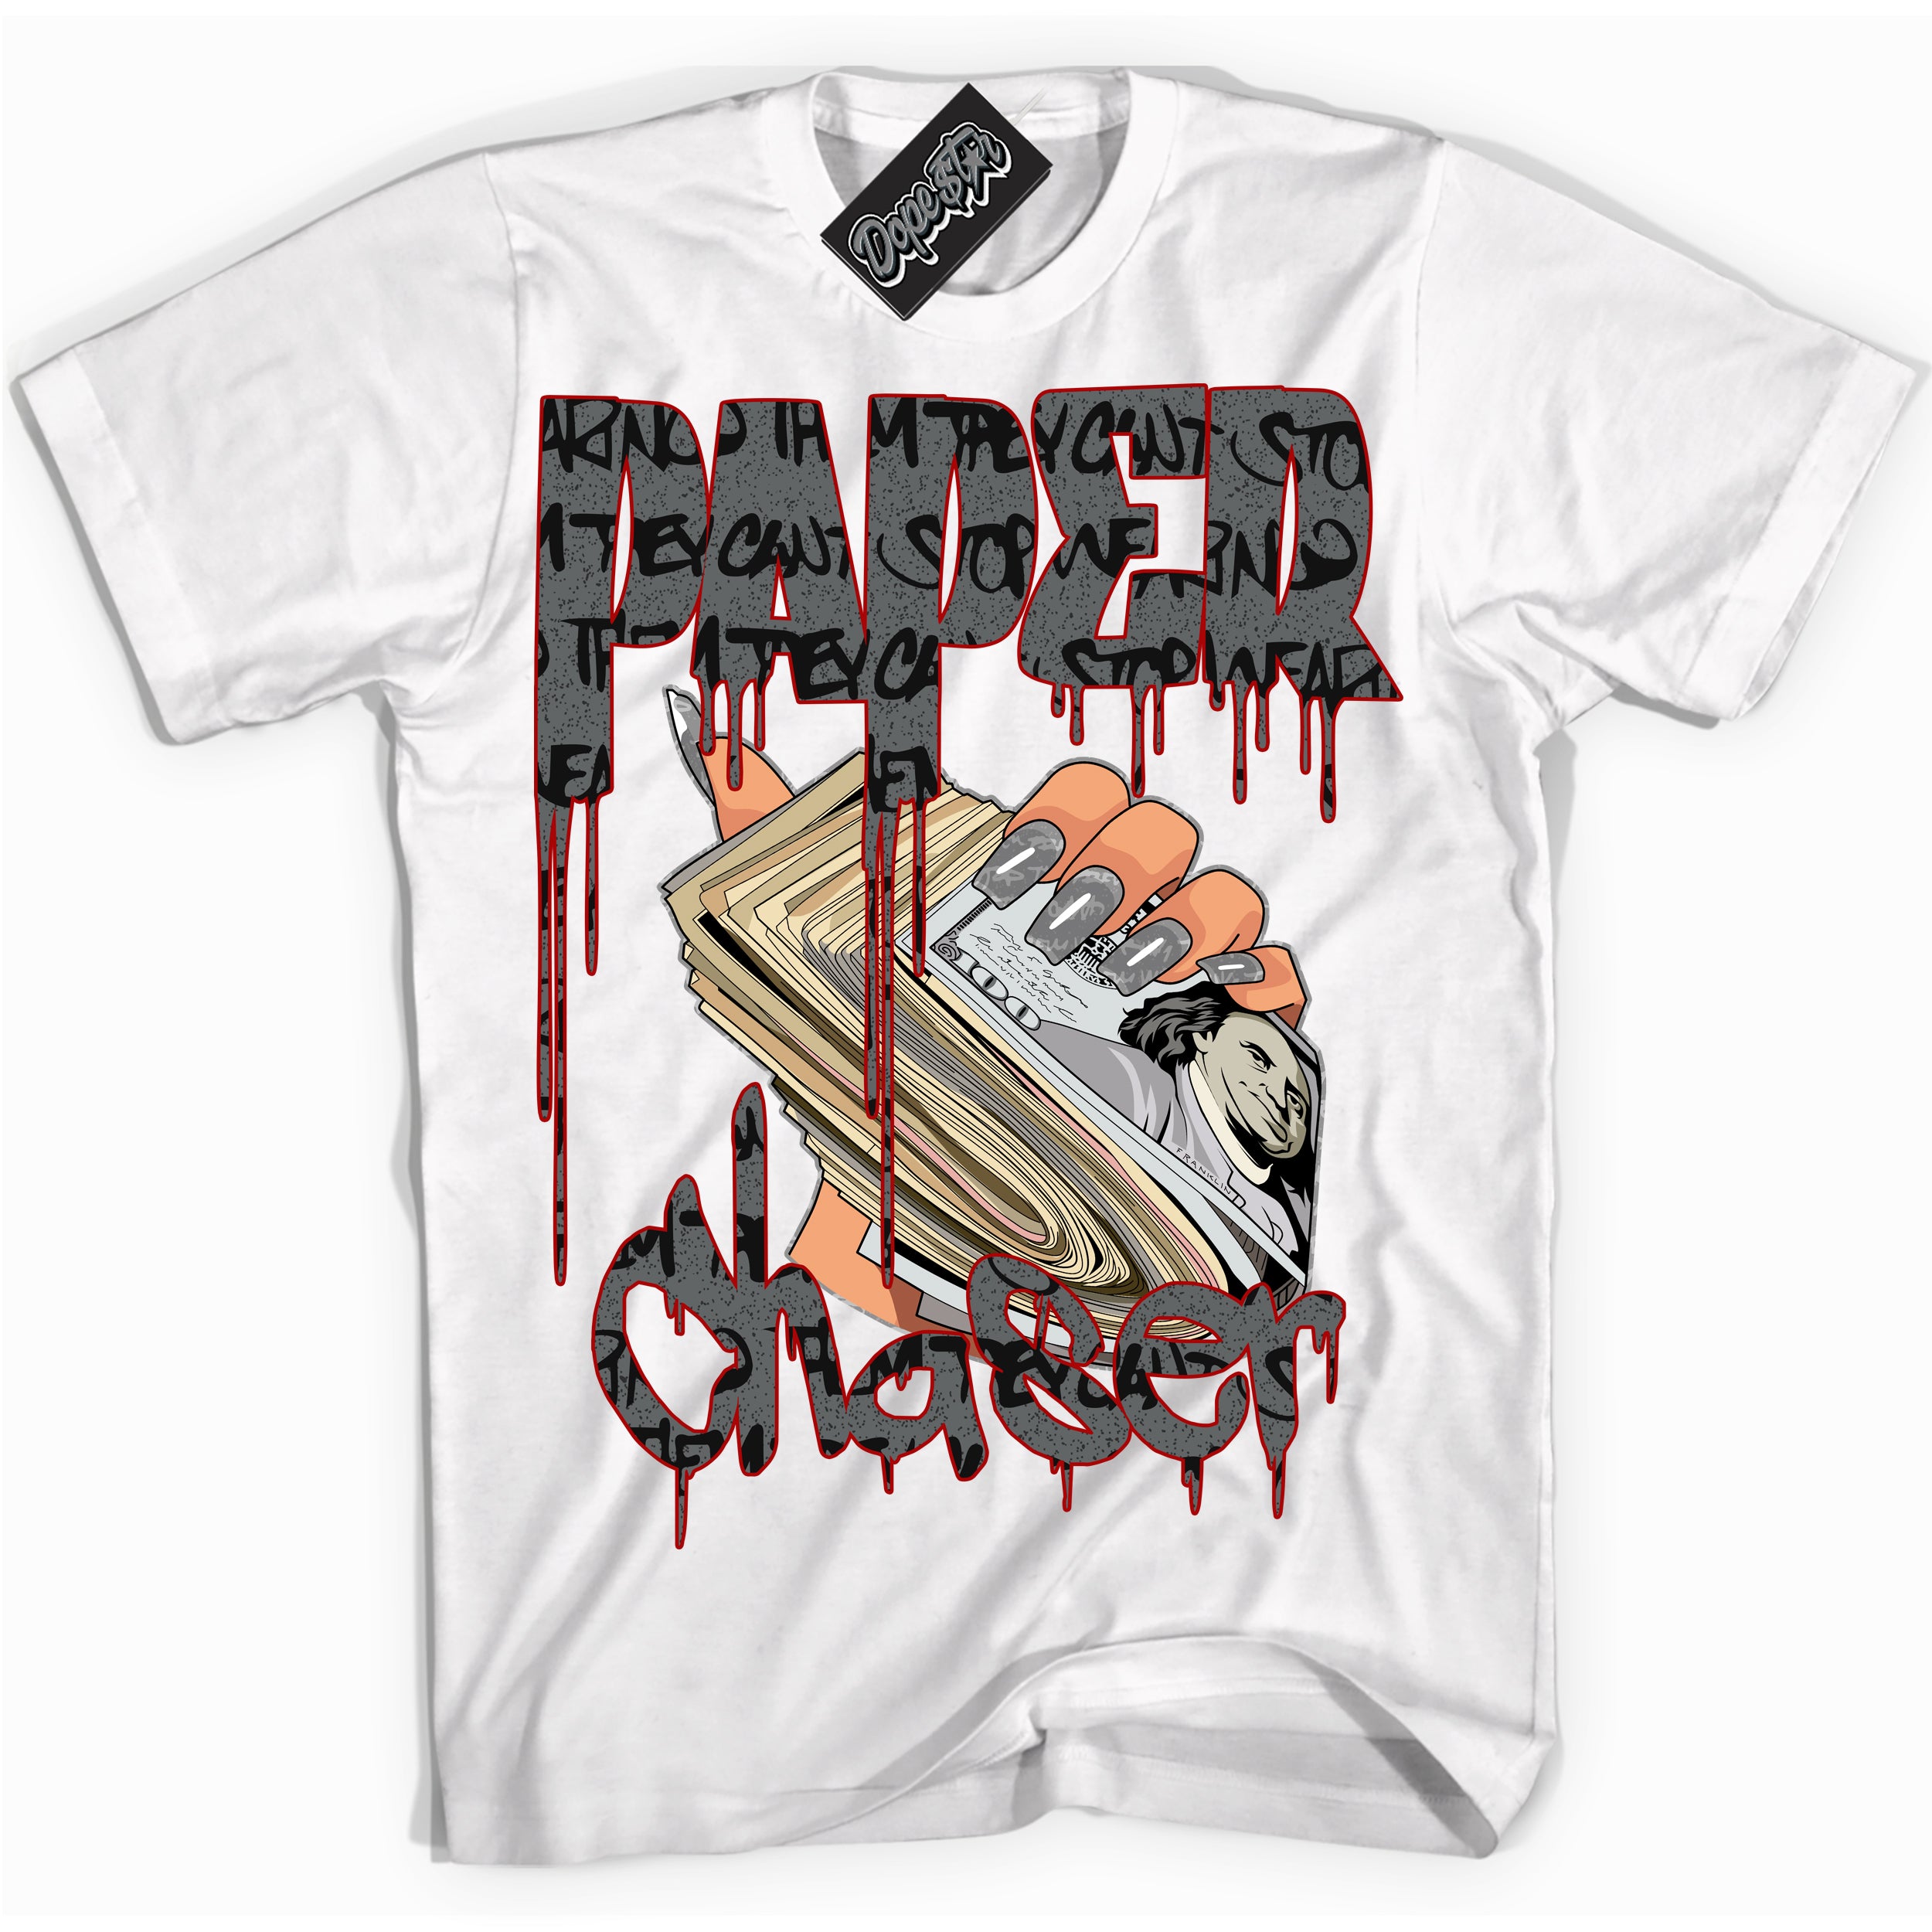 Cool White Shirt with “ Paper Chaser ” design that perfectly matches Rebellionaire 1s Sneakers.